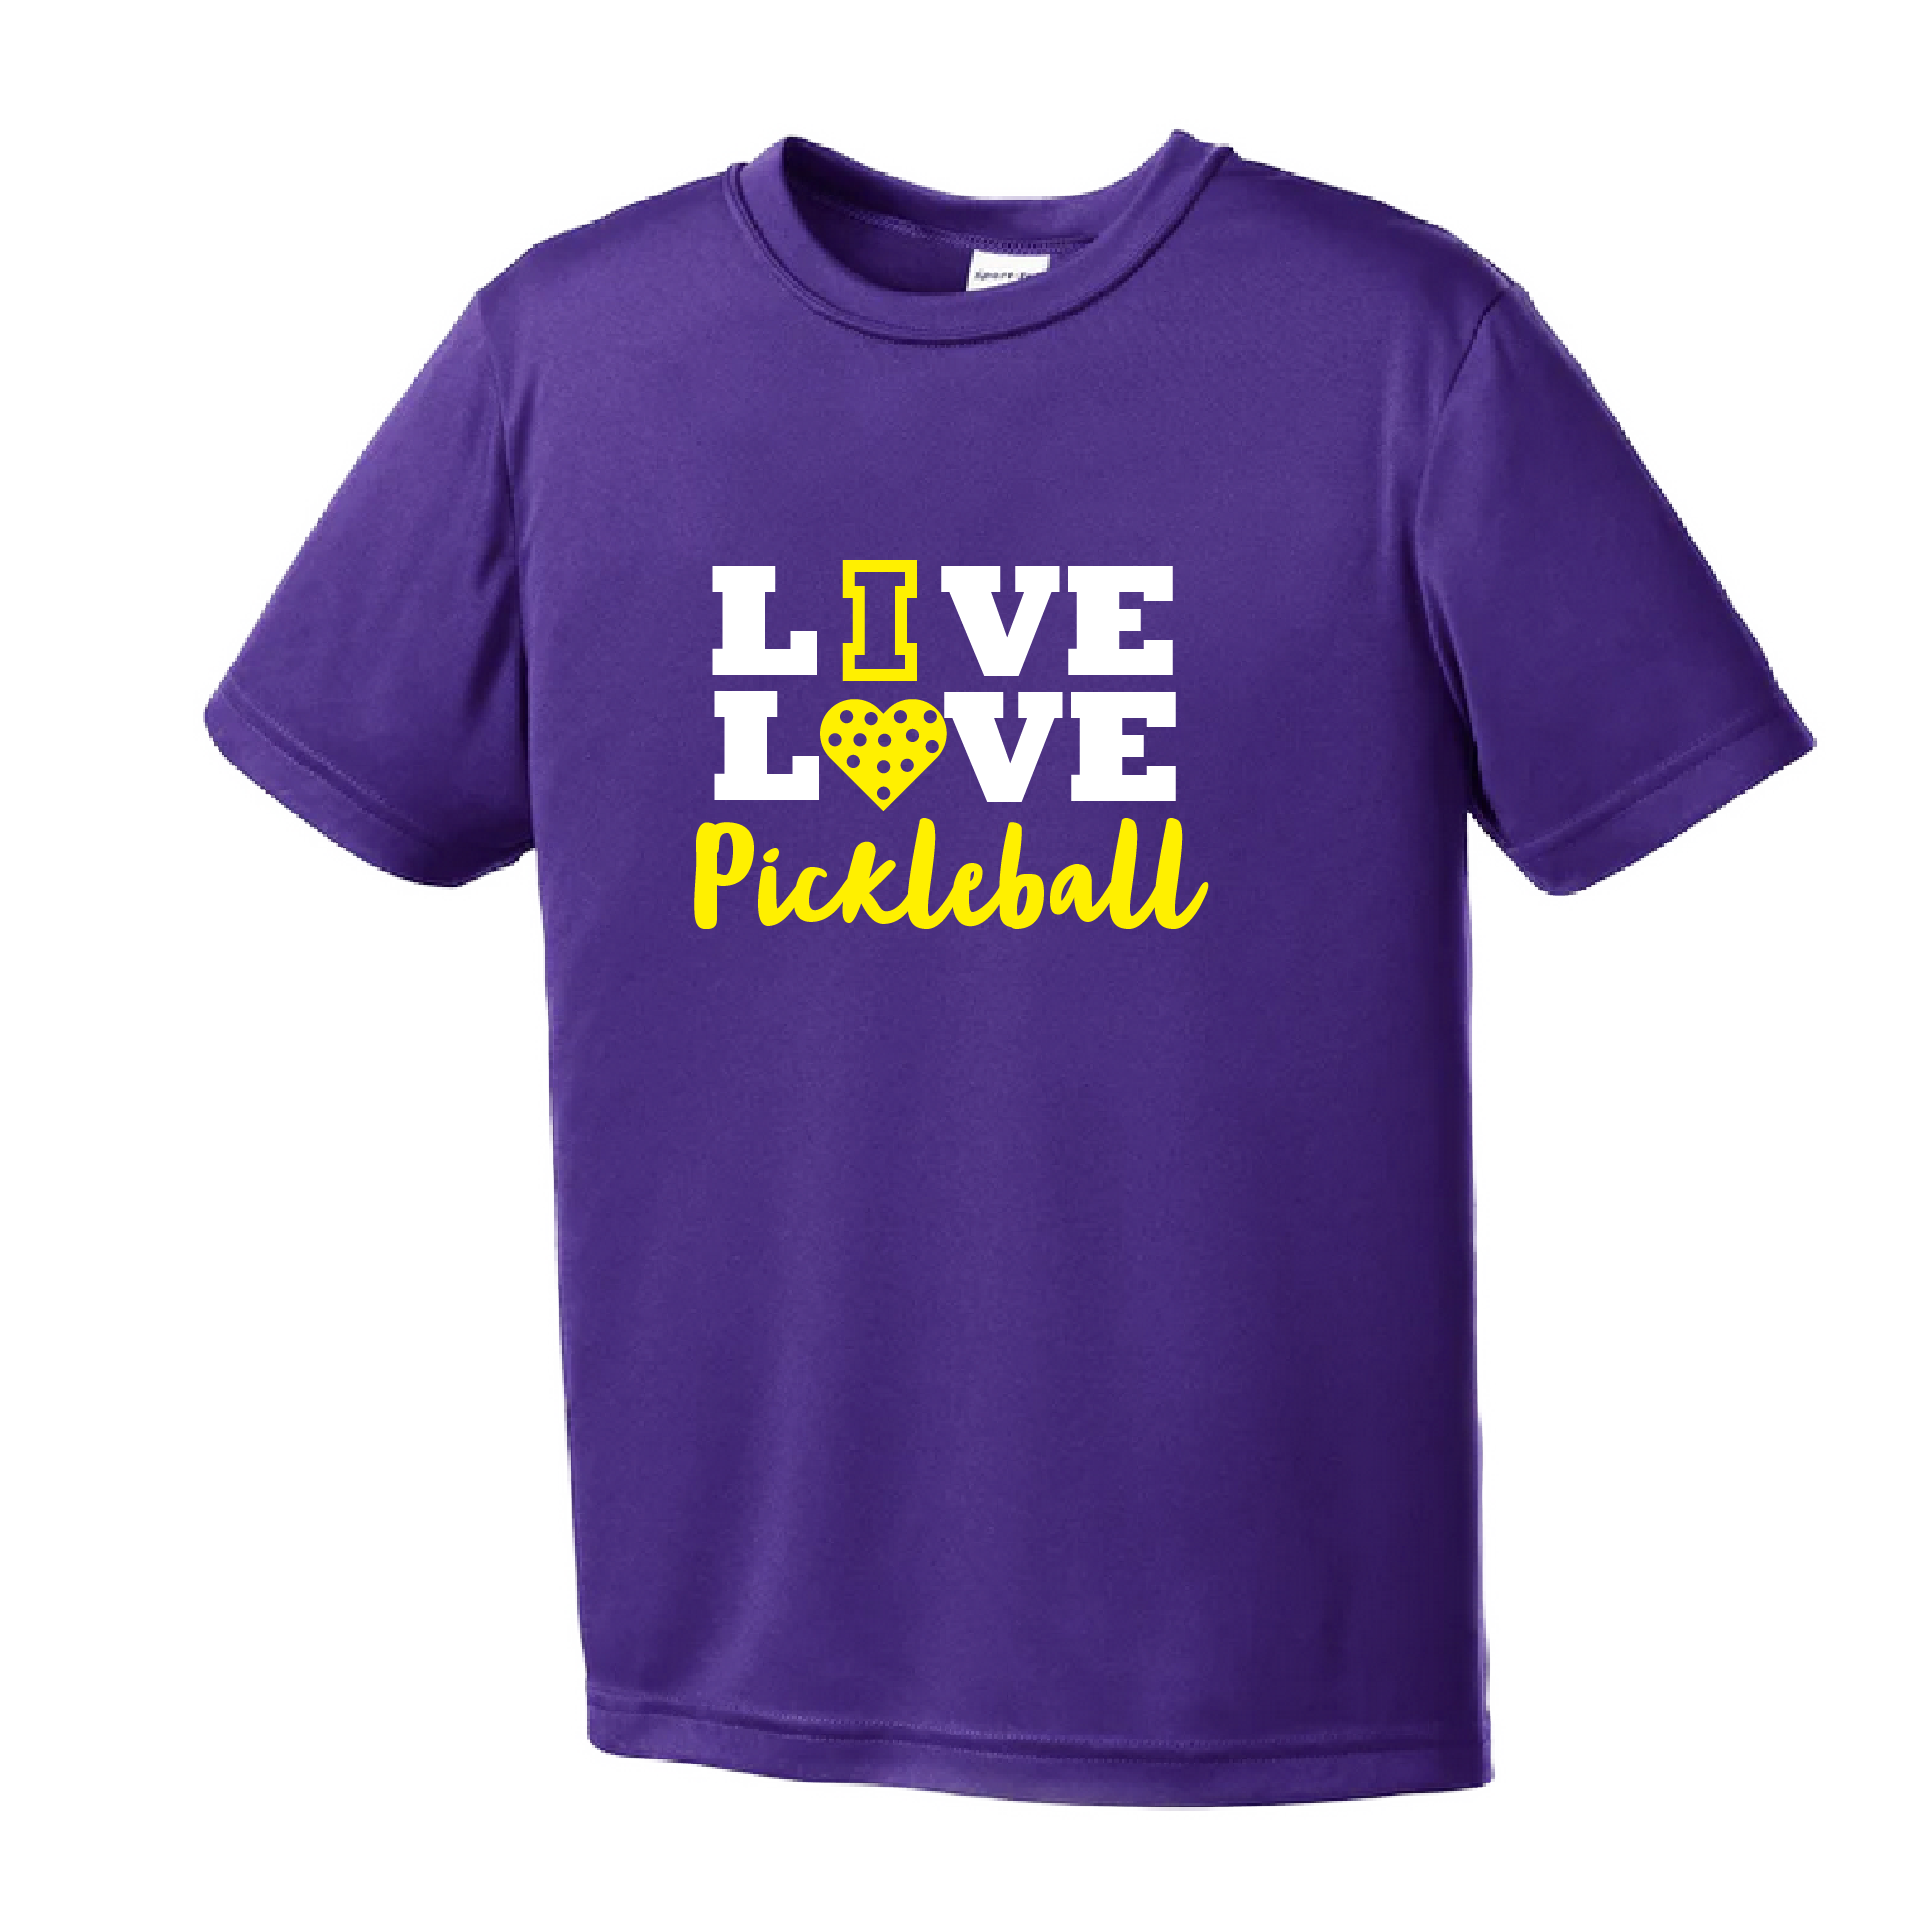 Pickleball Design: Live Love Pickleball  Youth Style: Short Sleeve  Shirts are lightweight, roomy and highly breathable. These moisture-wicking shirts are designed for athletic performance. They feature PosiCharge technology to lock in color and prevent logos from fading. Removable tag and set-in sleeves for comfort.